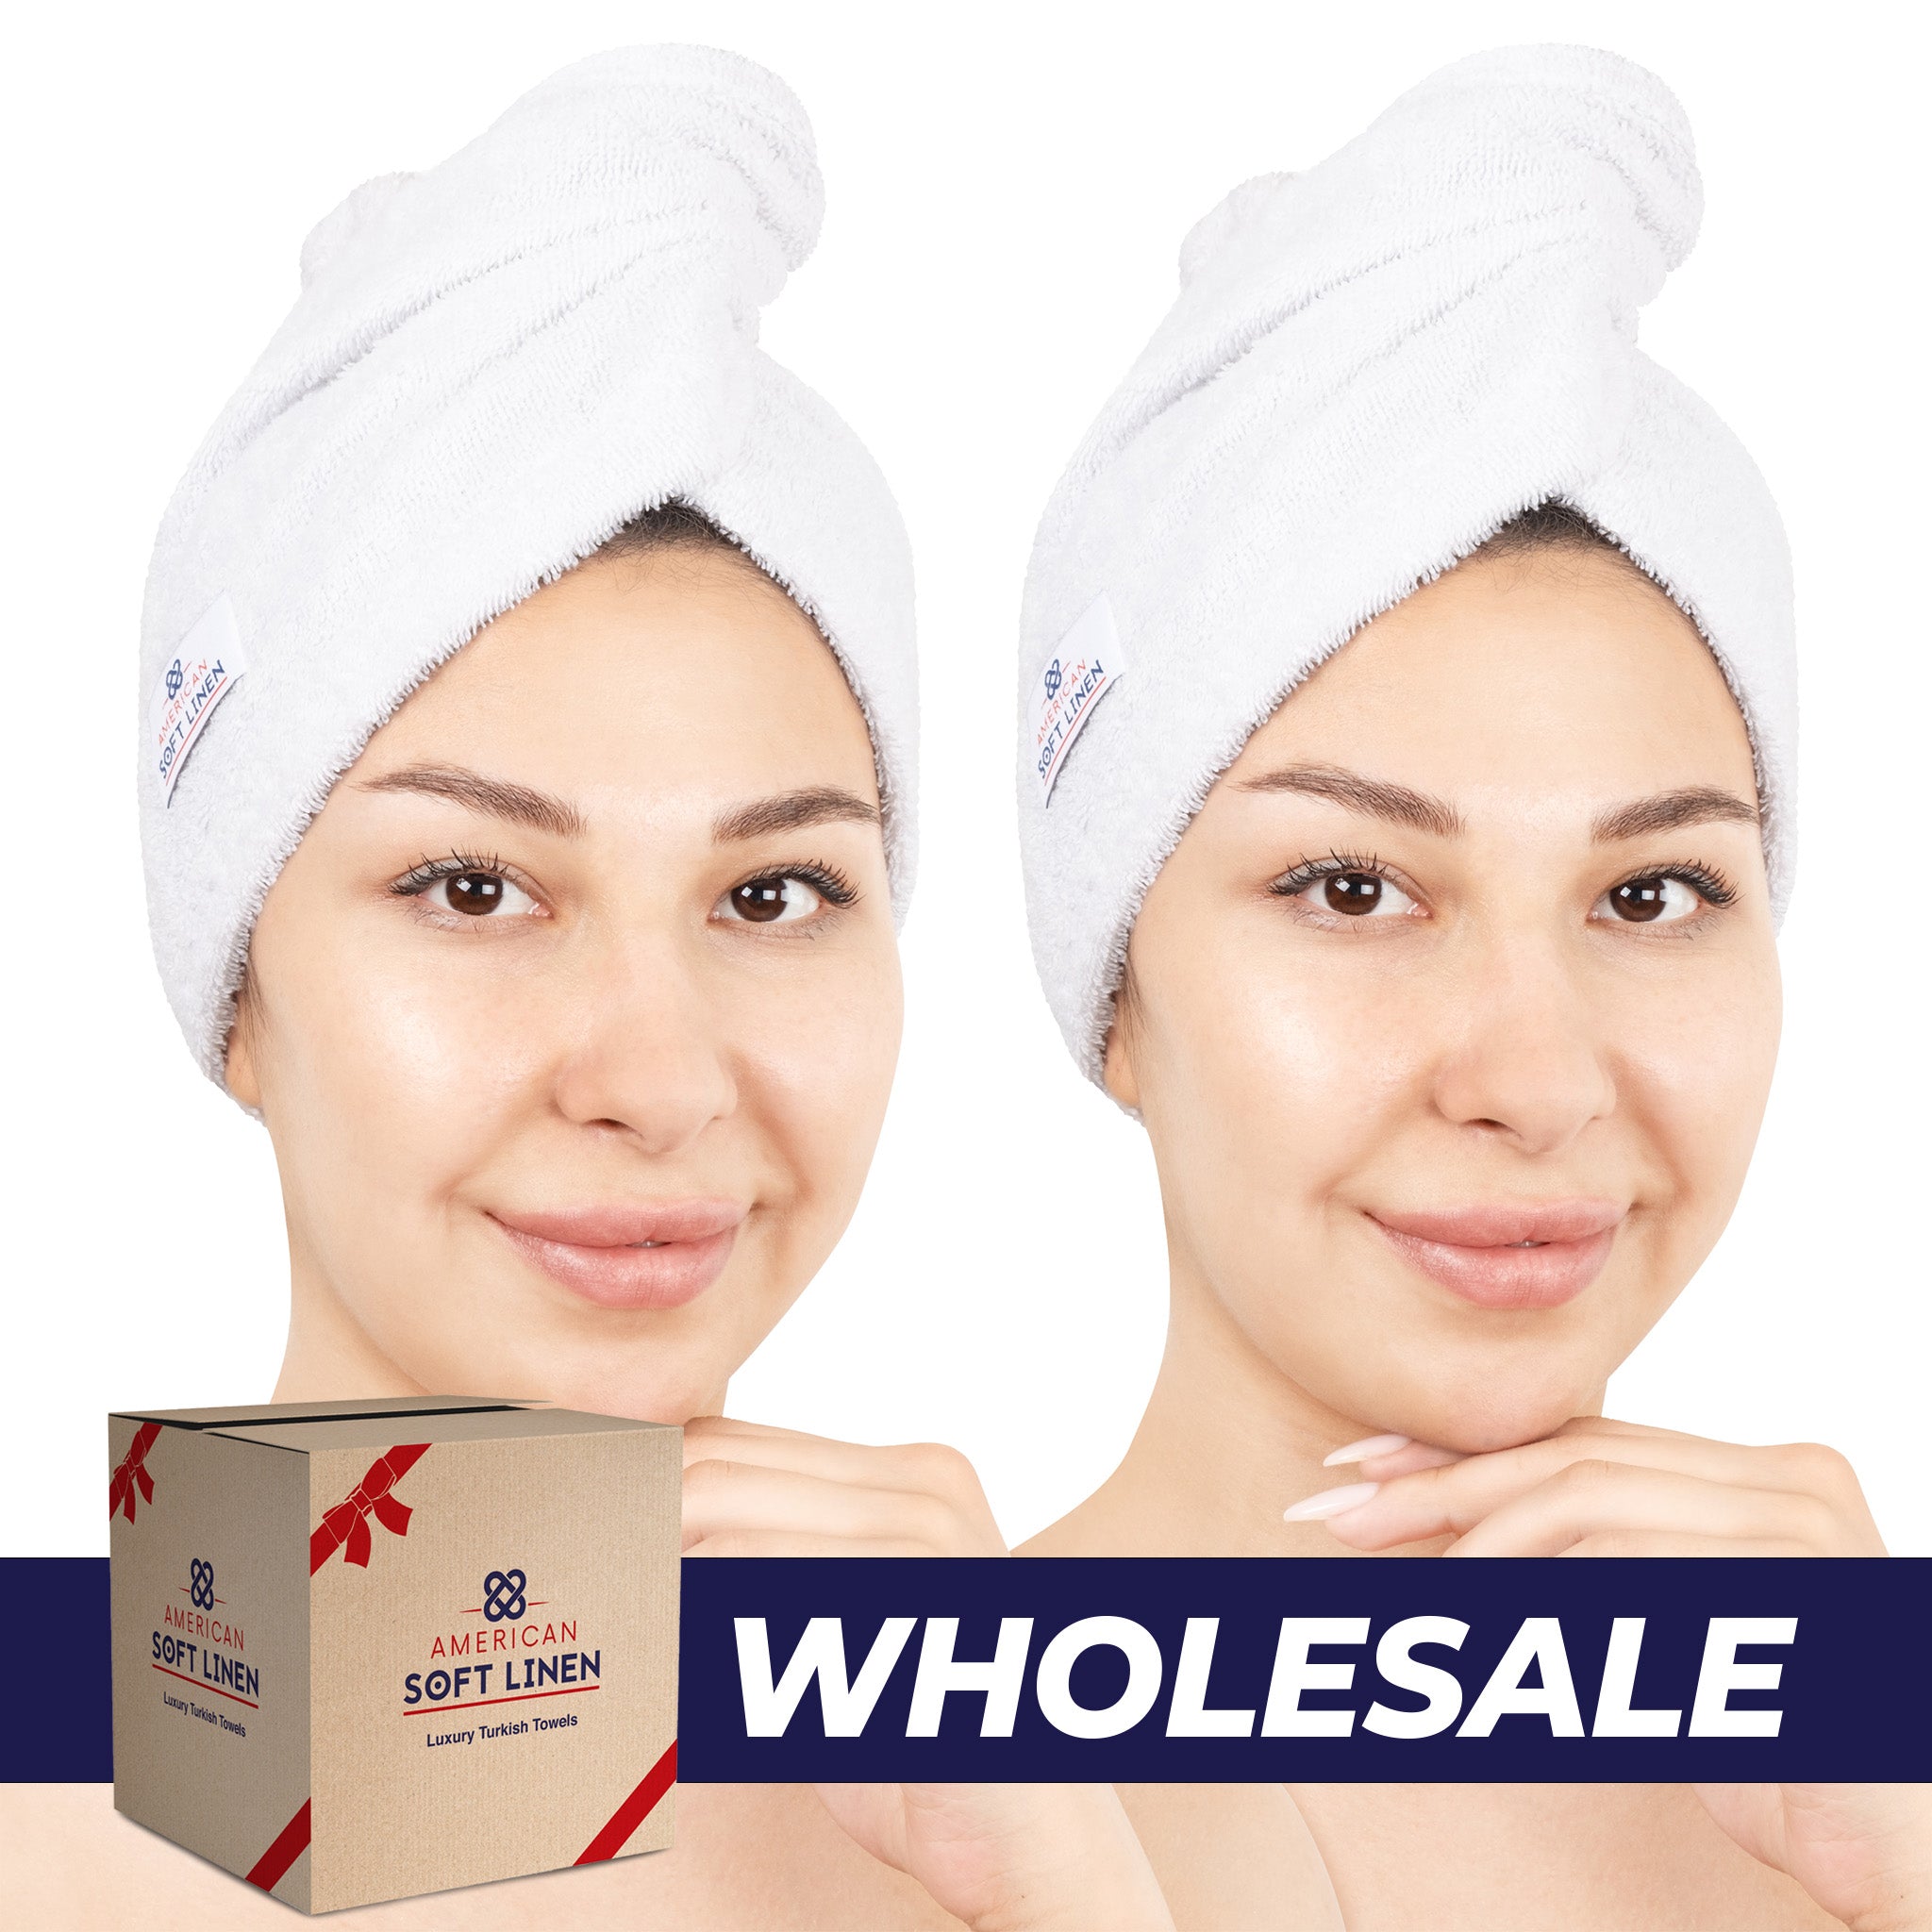 American Soft Linen 100% Cotton Hair Drying Towels for Women 2 pack 75 set case pack white-0